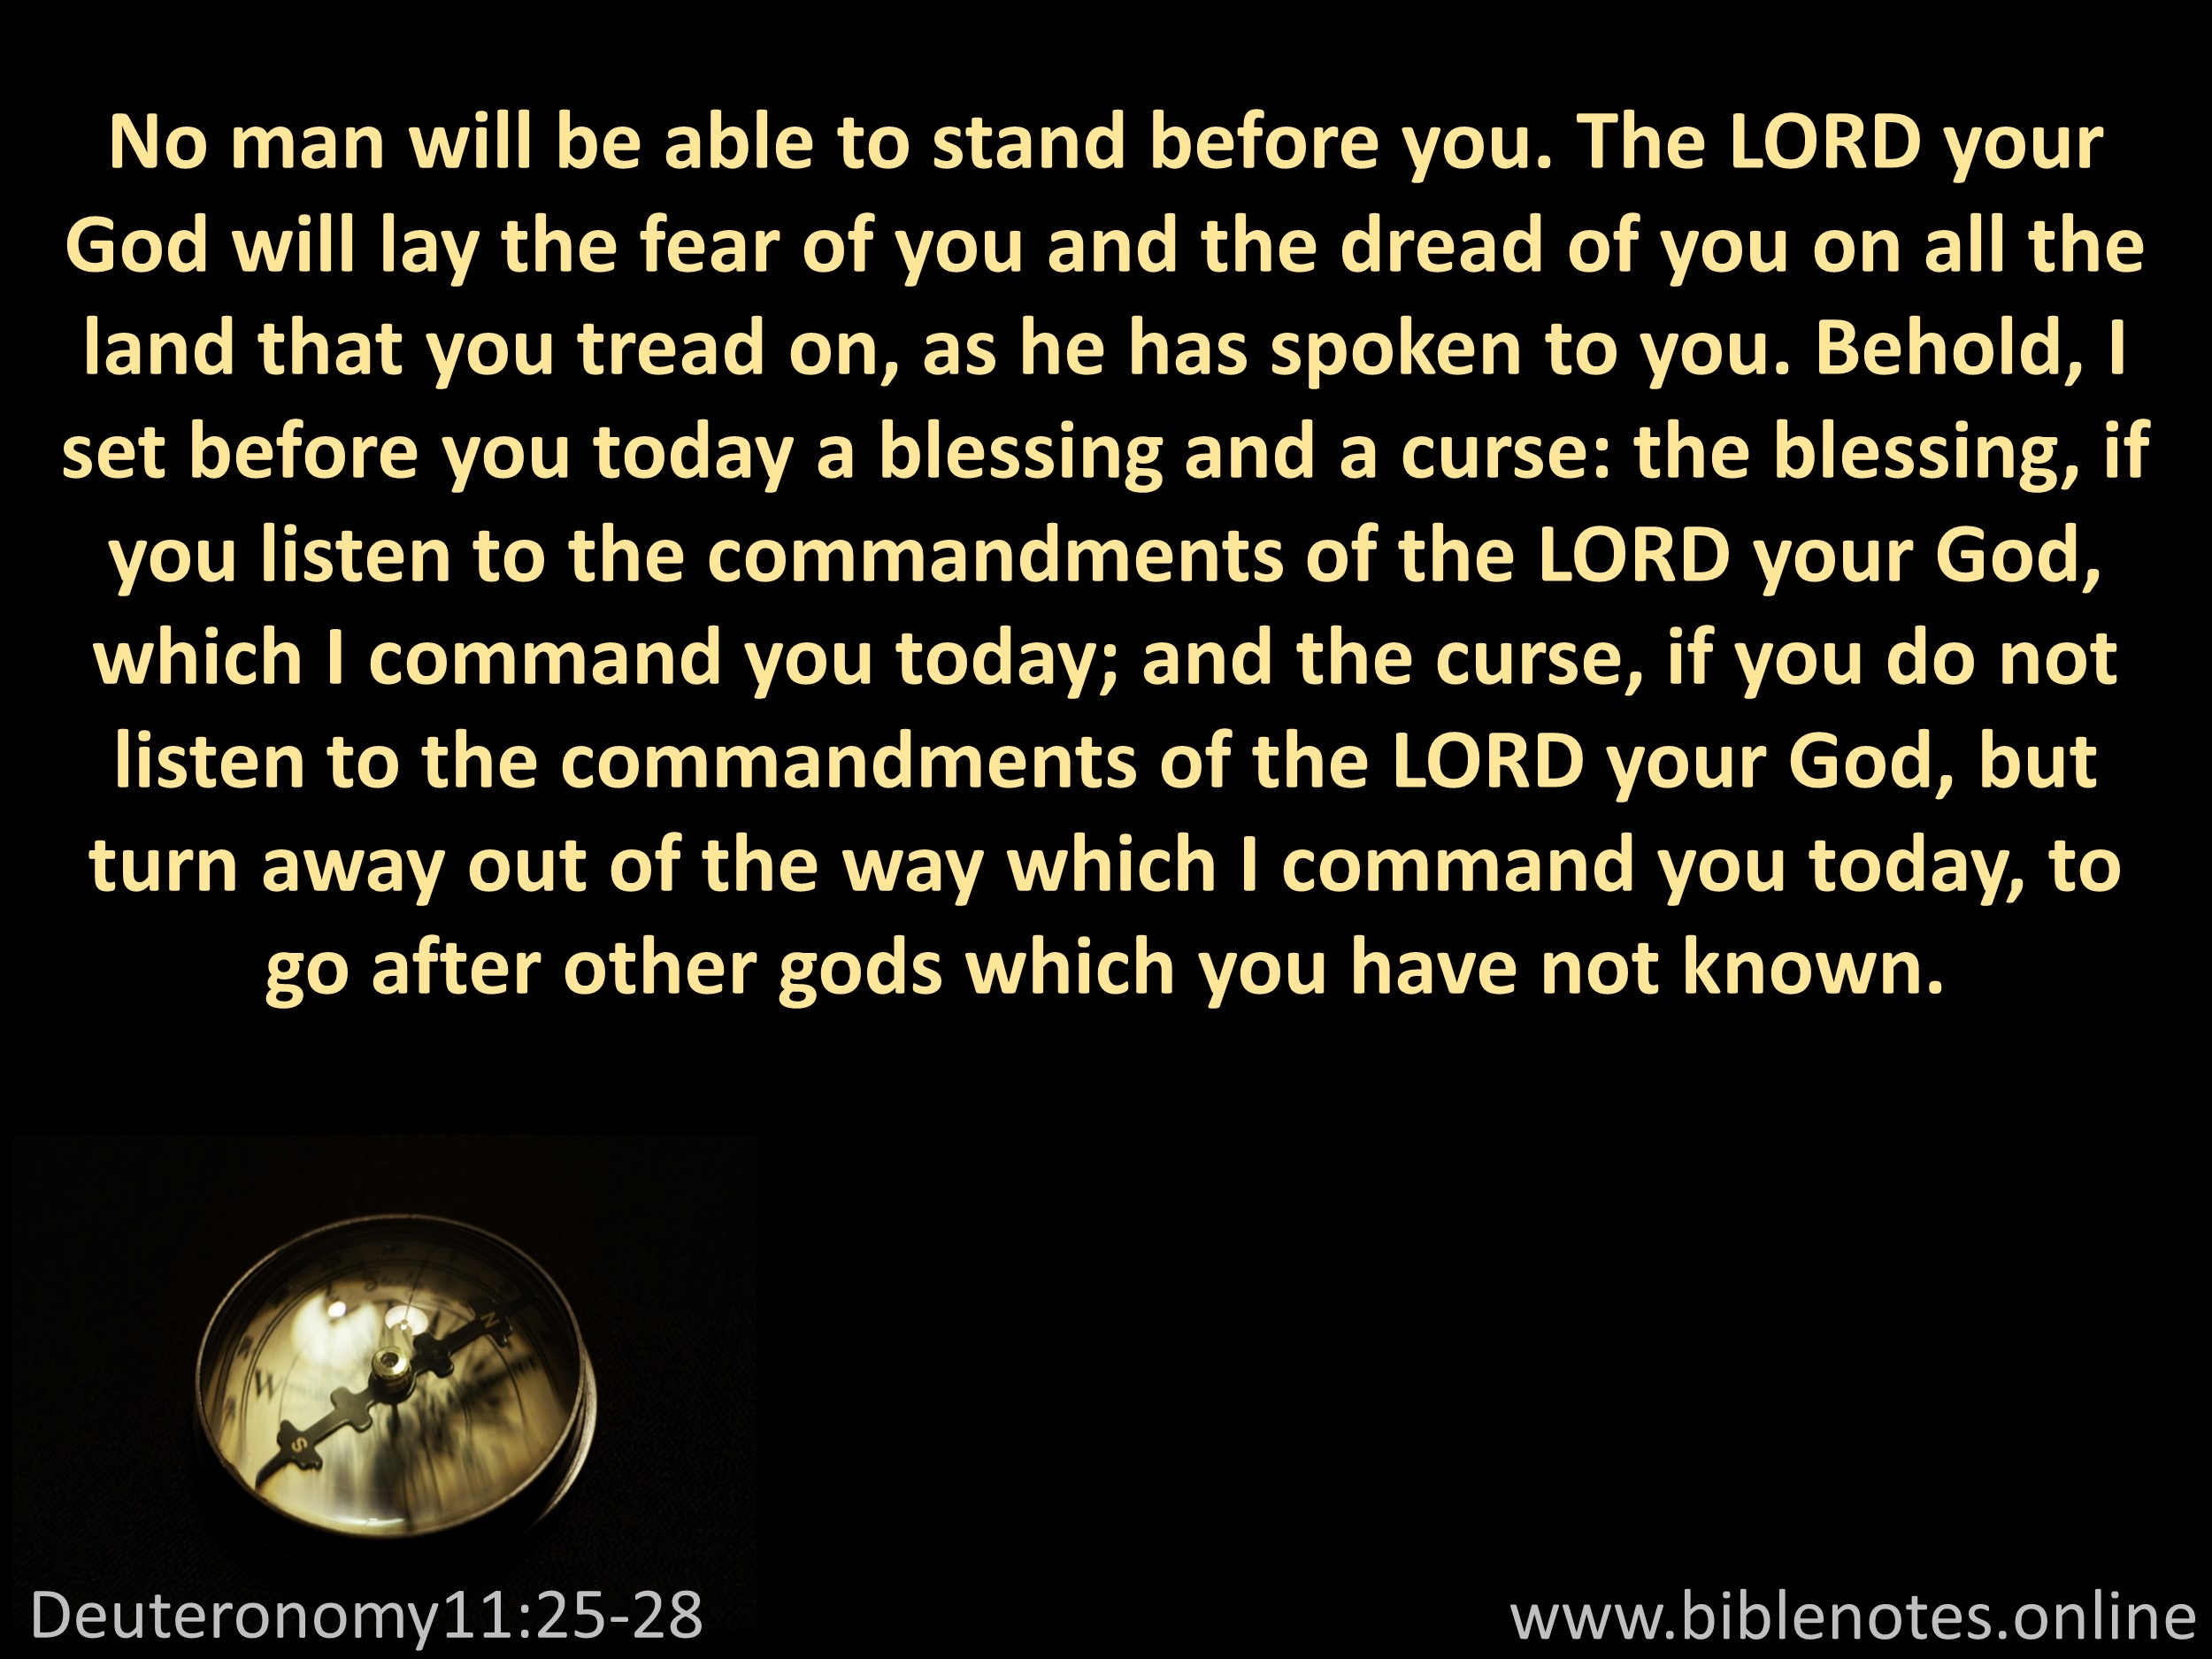 Bible Verse from Deuteronomy Chapter 11